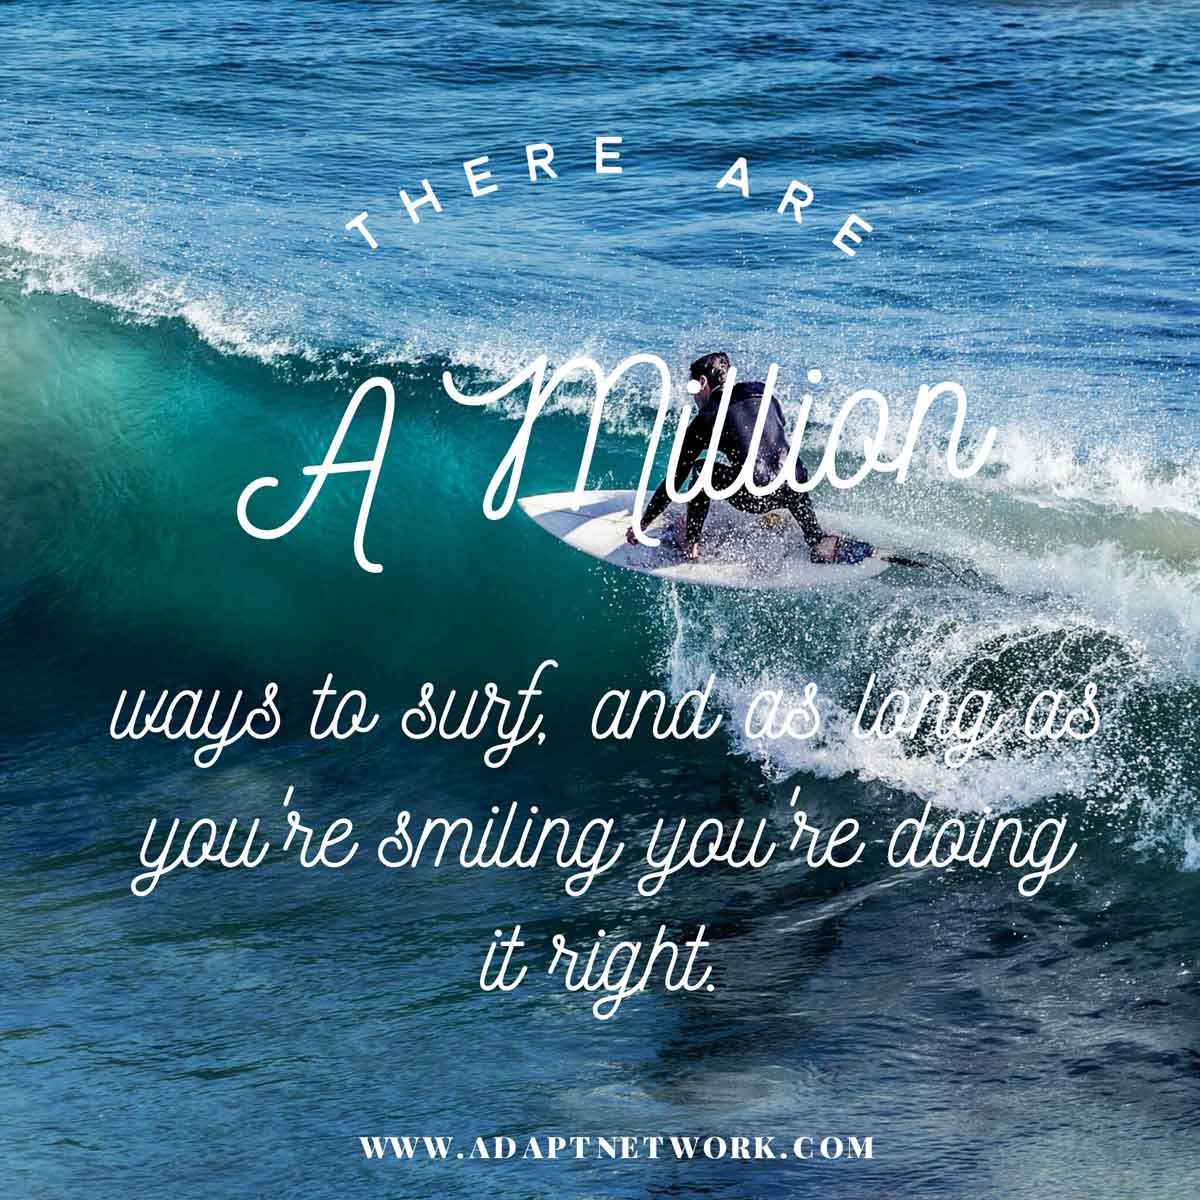 "There are a million ways to surf, and as long as you're 